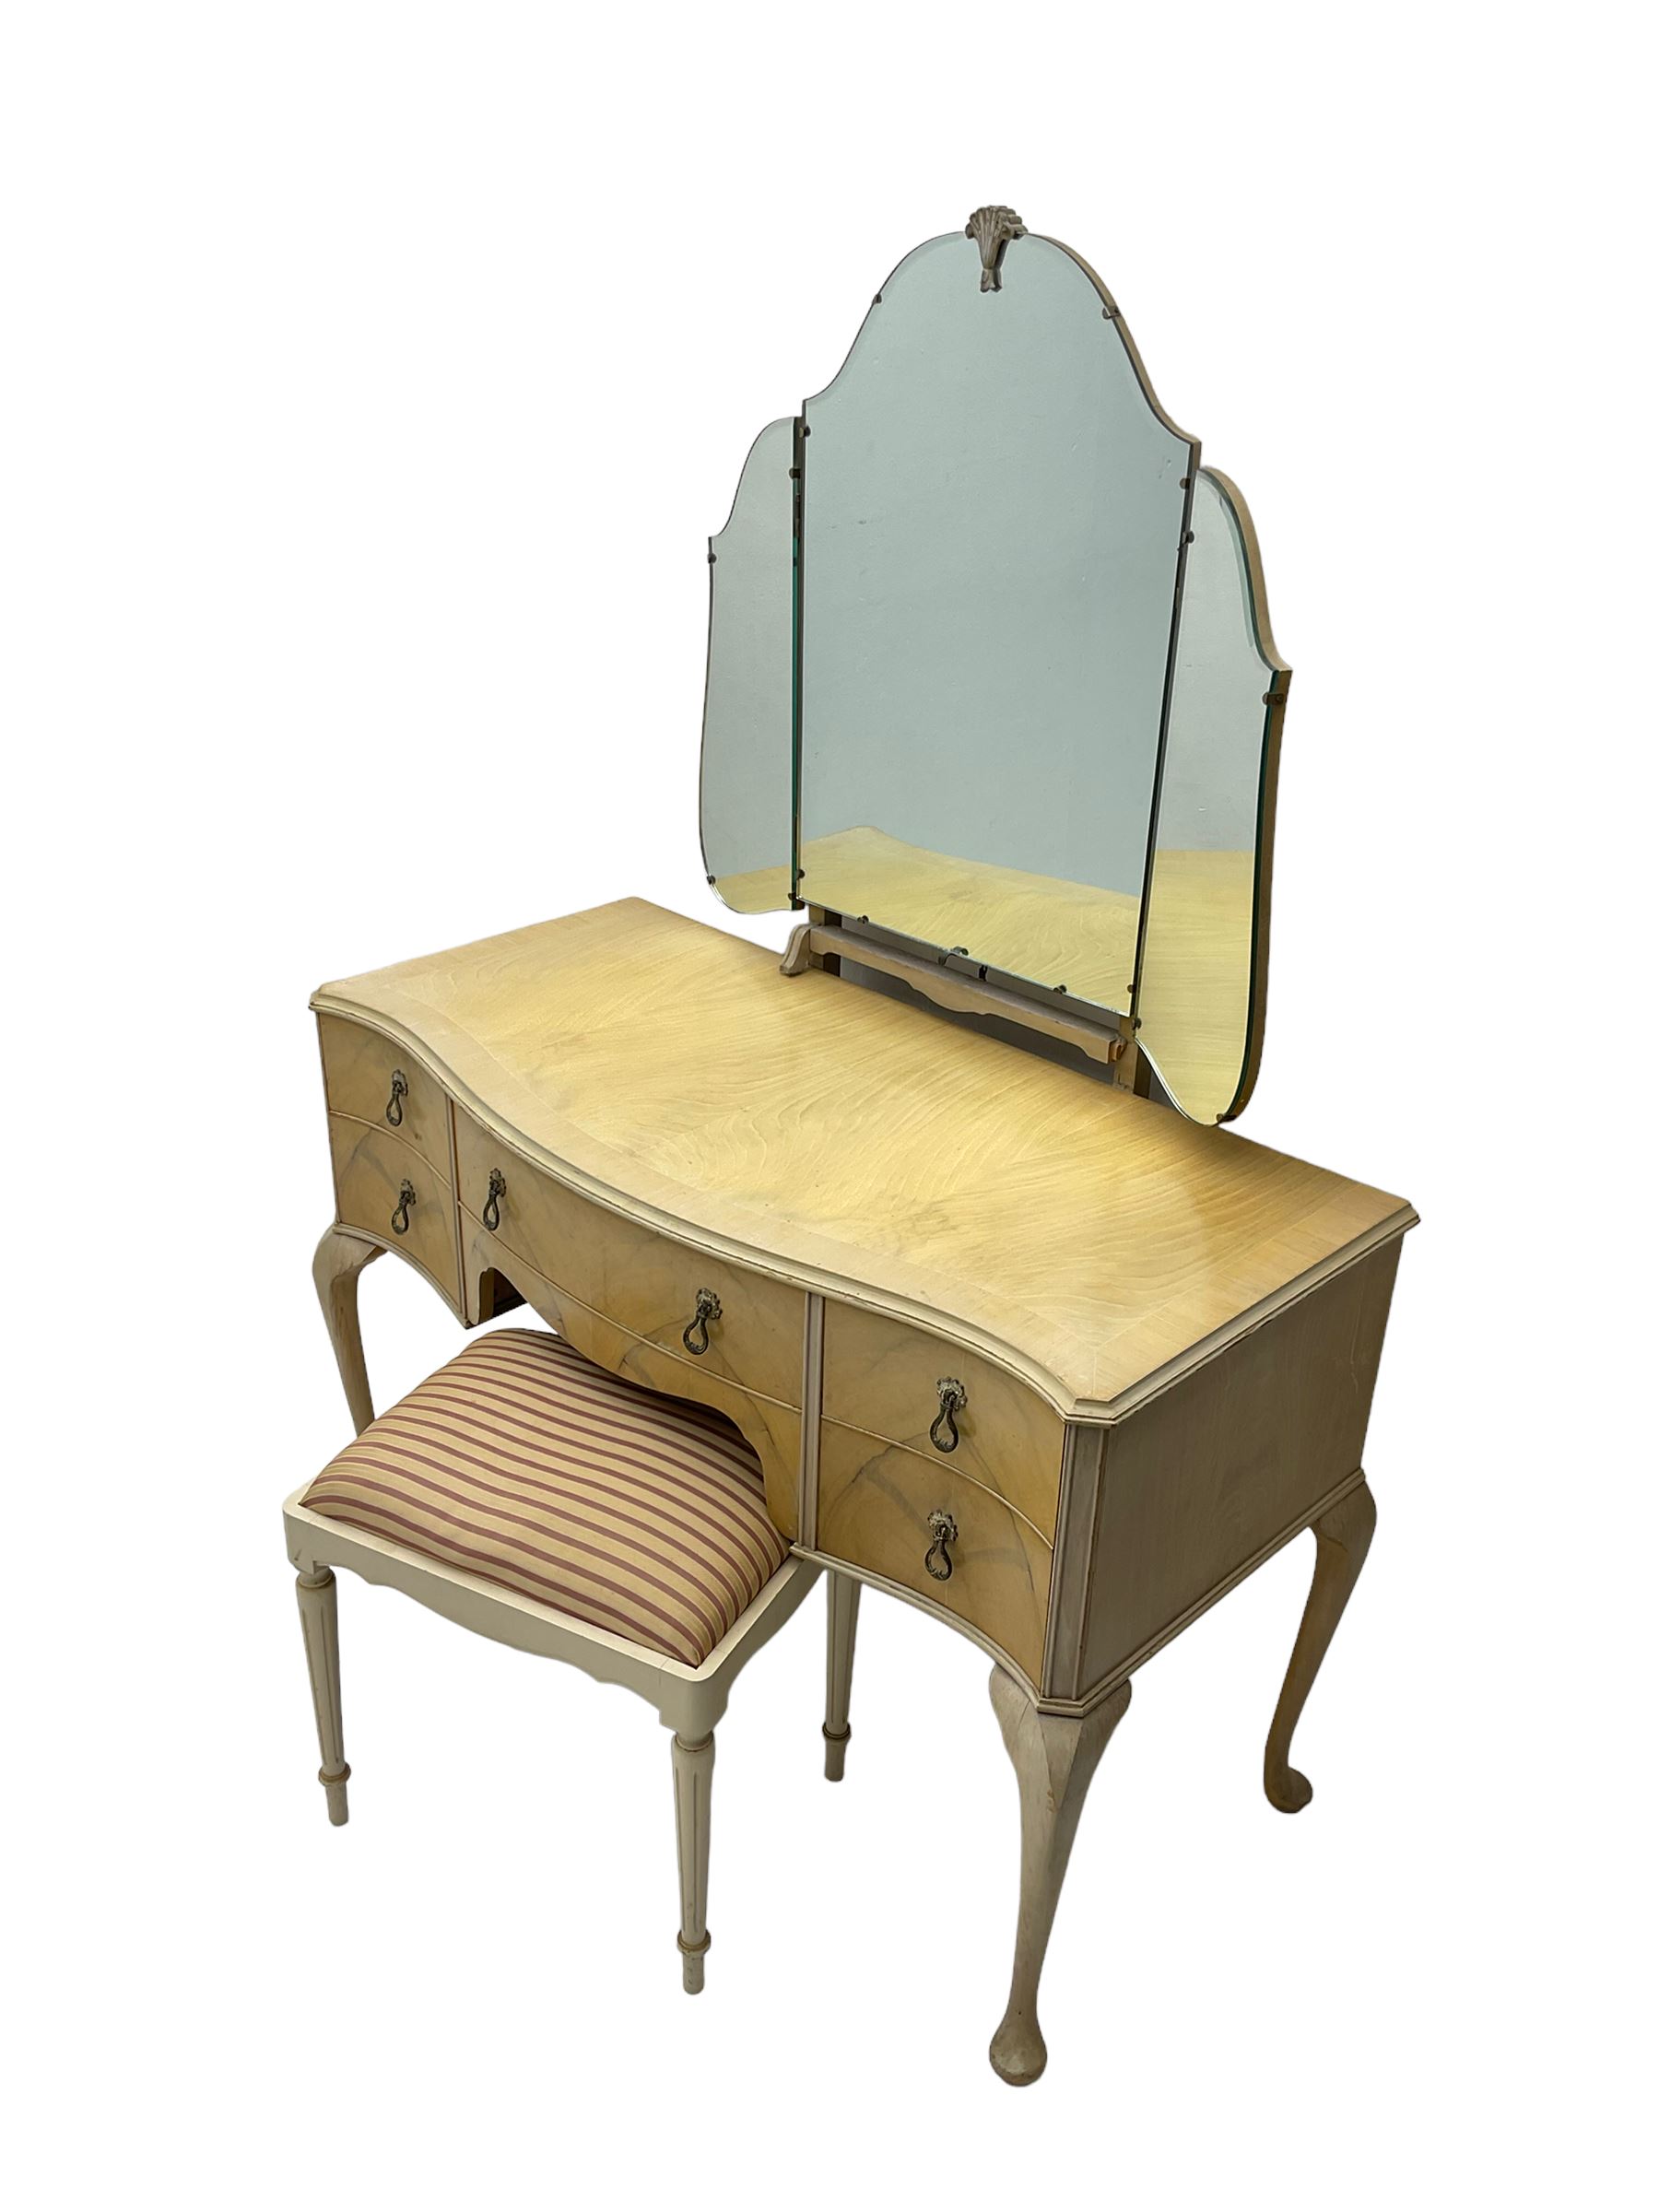 F Wrighton & Sons Ltd - French style painted serpentine dressing table - Image 9 of 11